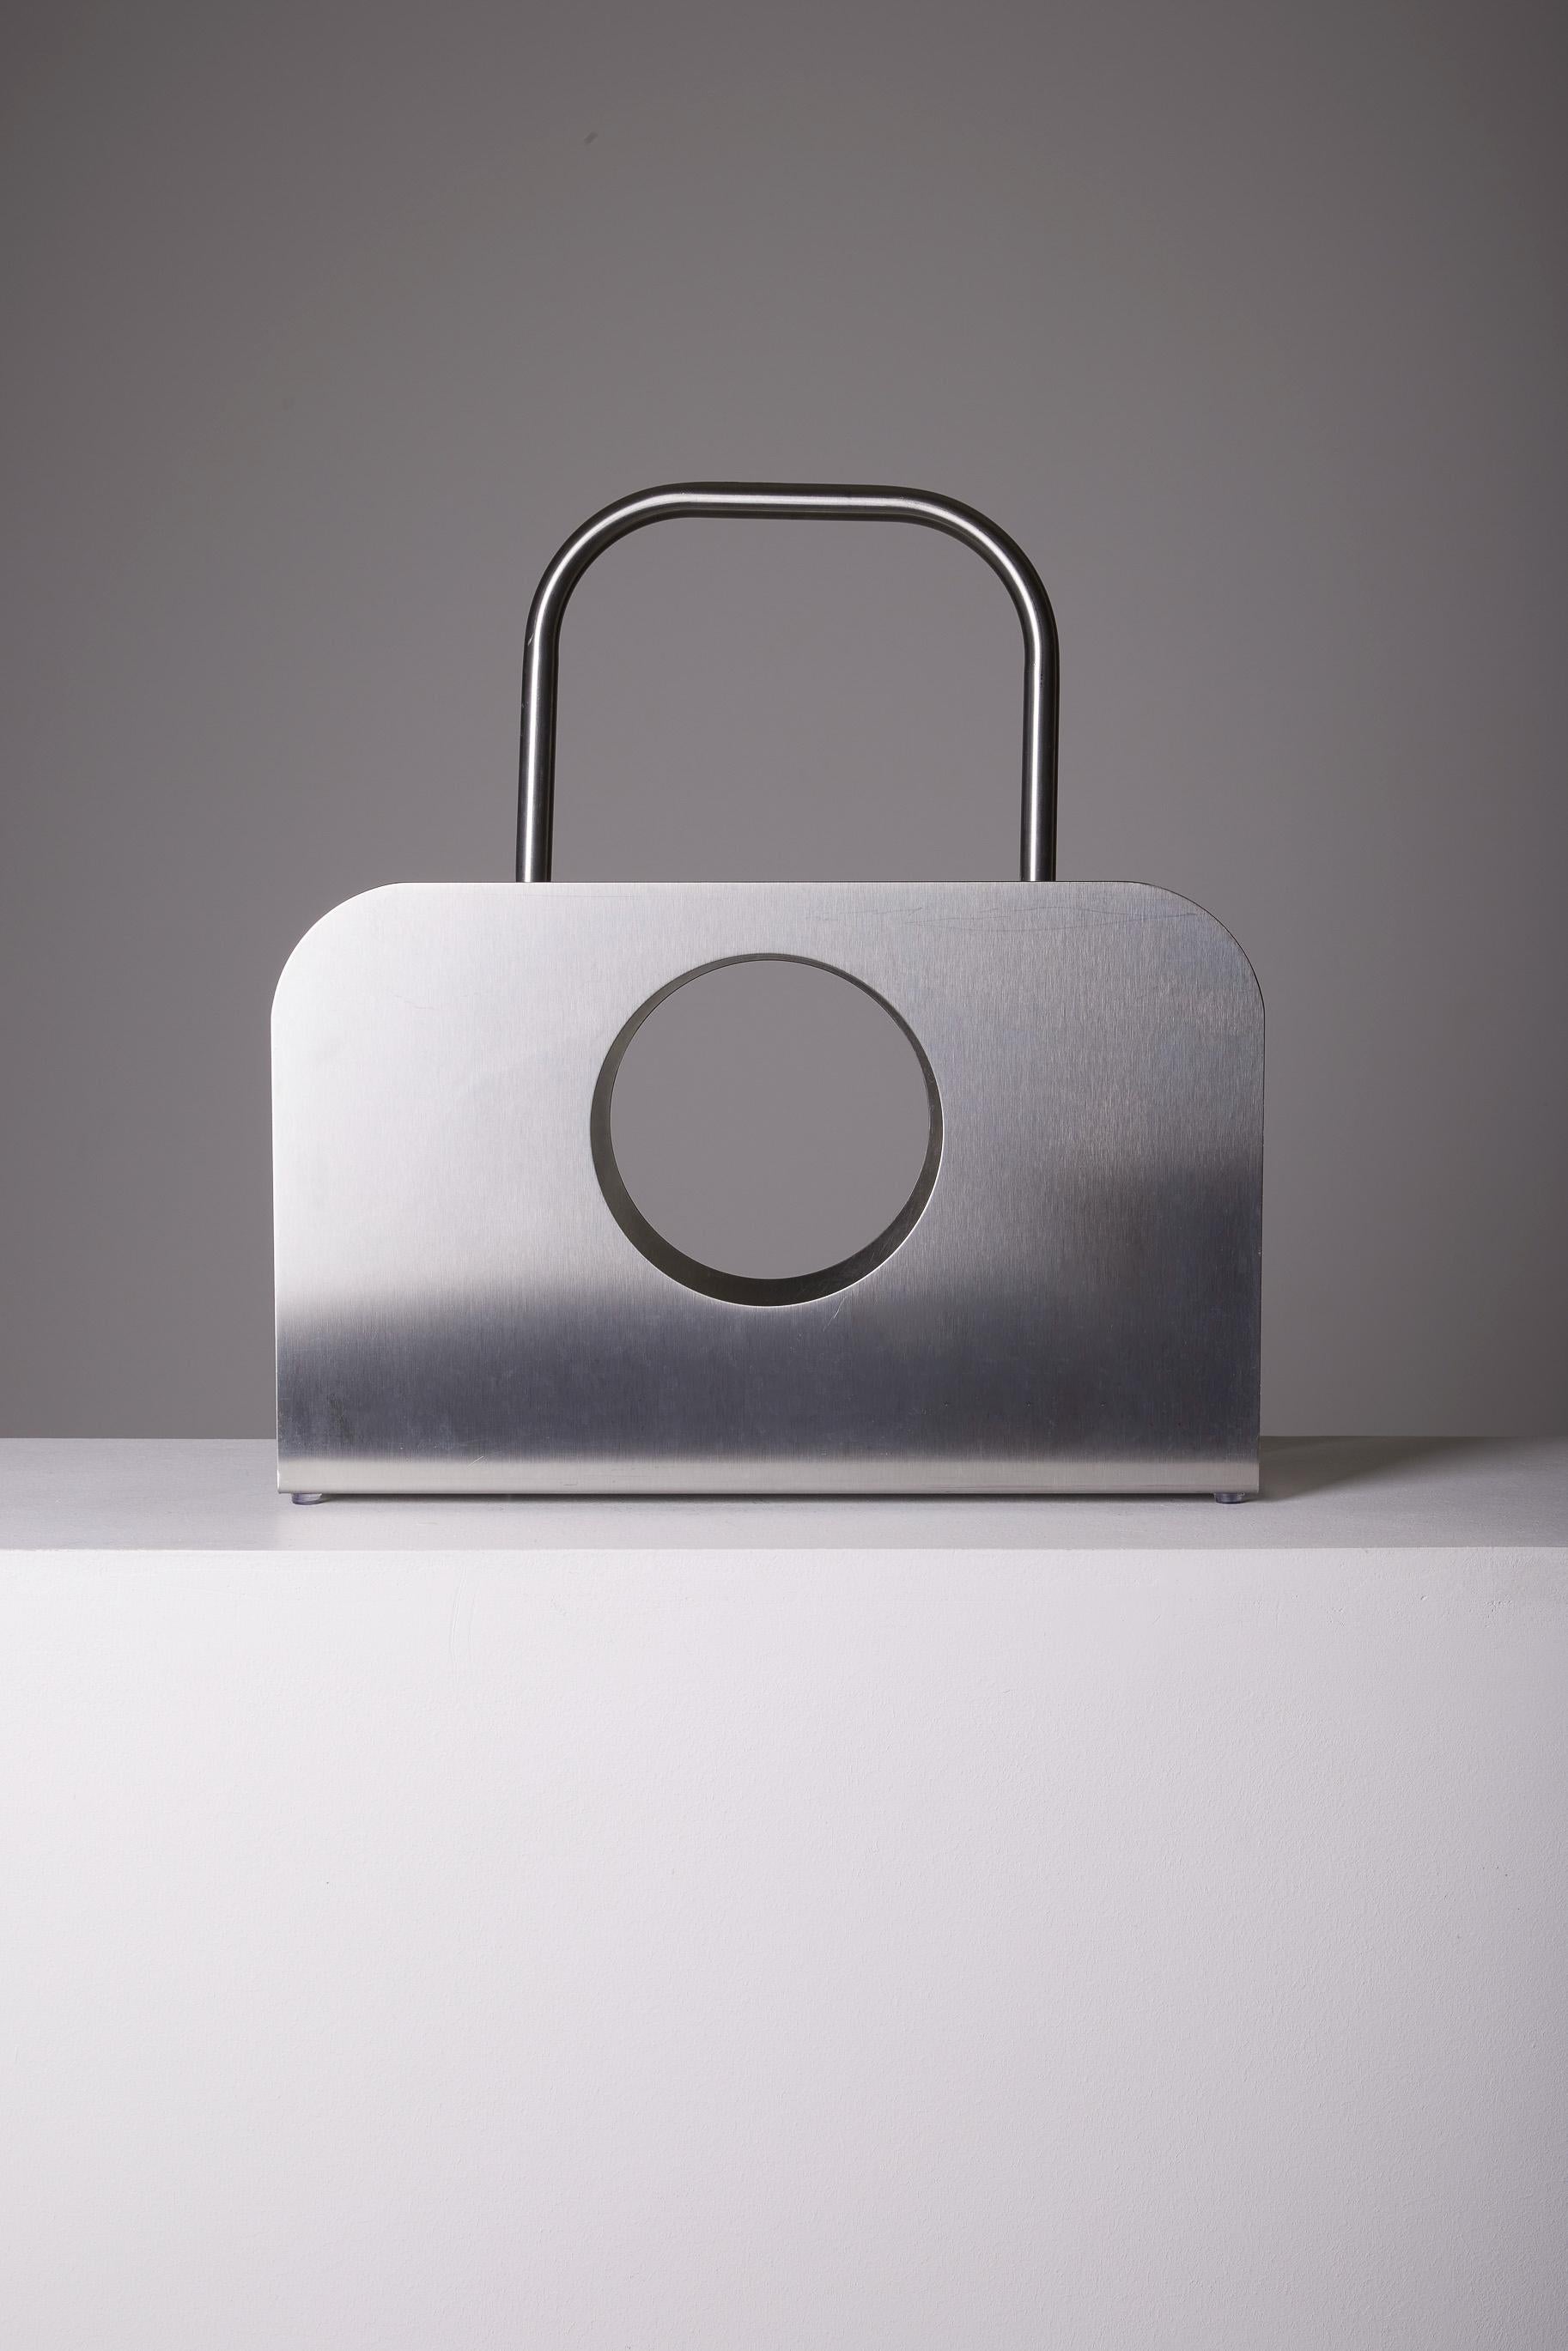 Stainless steel magazine rack by designer François Monnet (born 1946) for KAPPA, 1970s. In very good condition.
LP2645